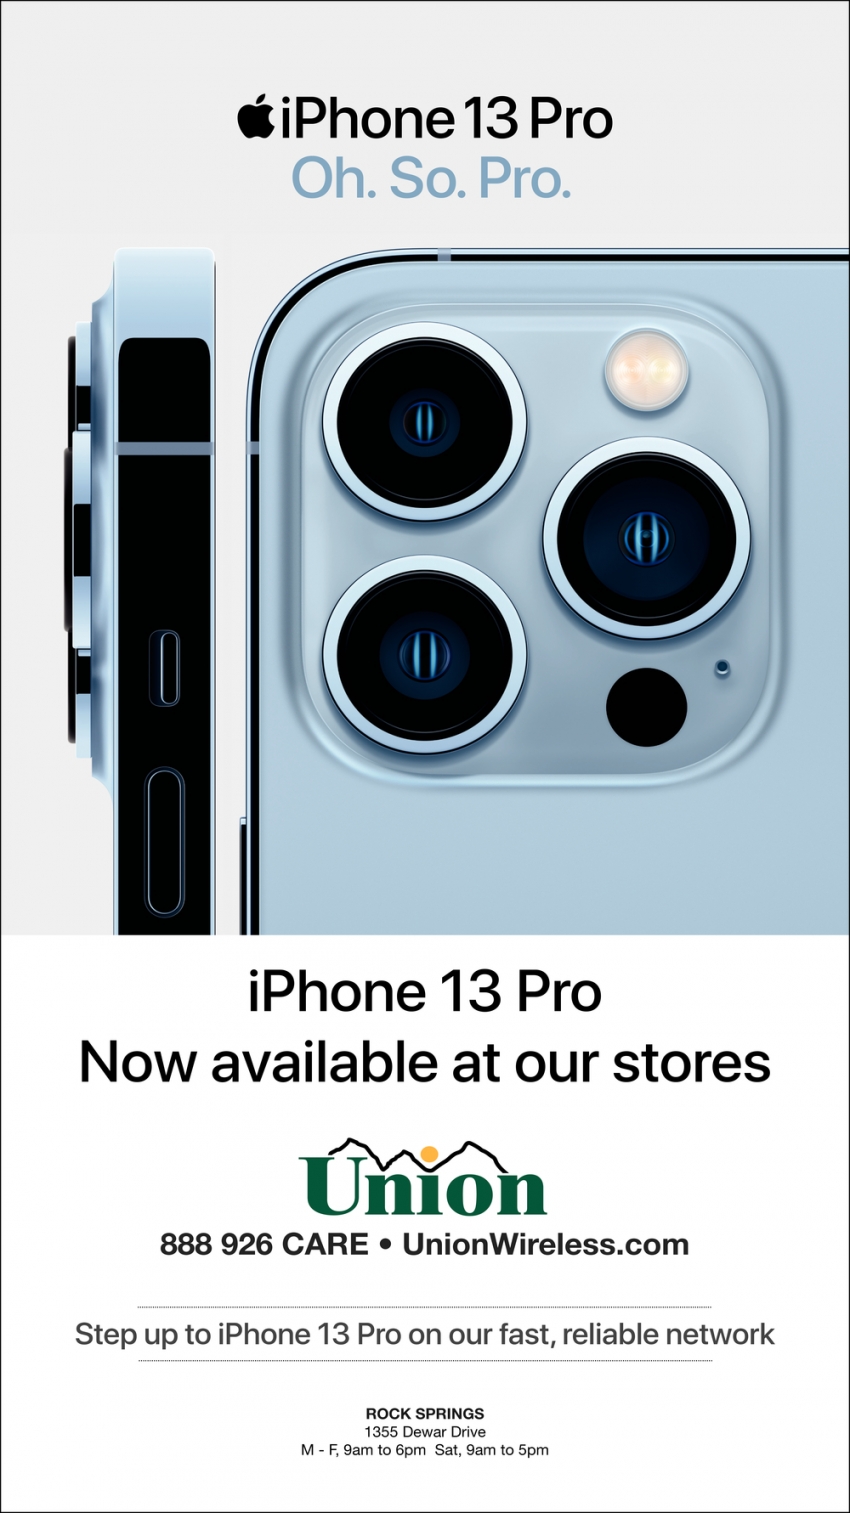 iPhone 13 Po. Oh. So. Pro.